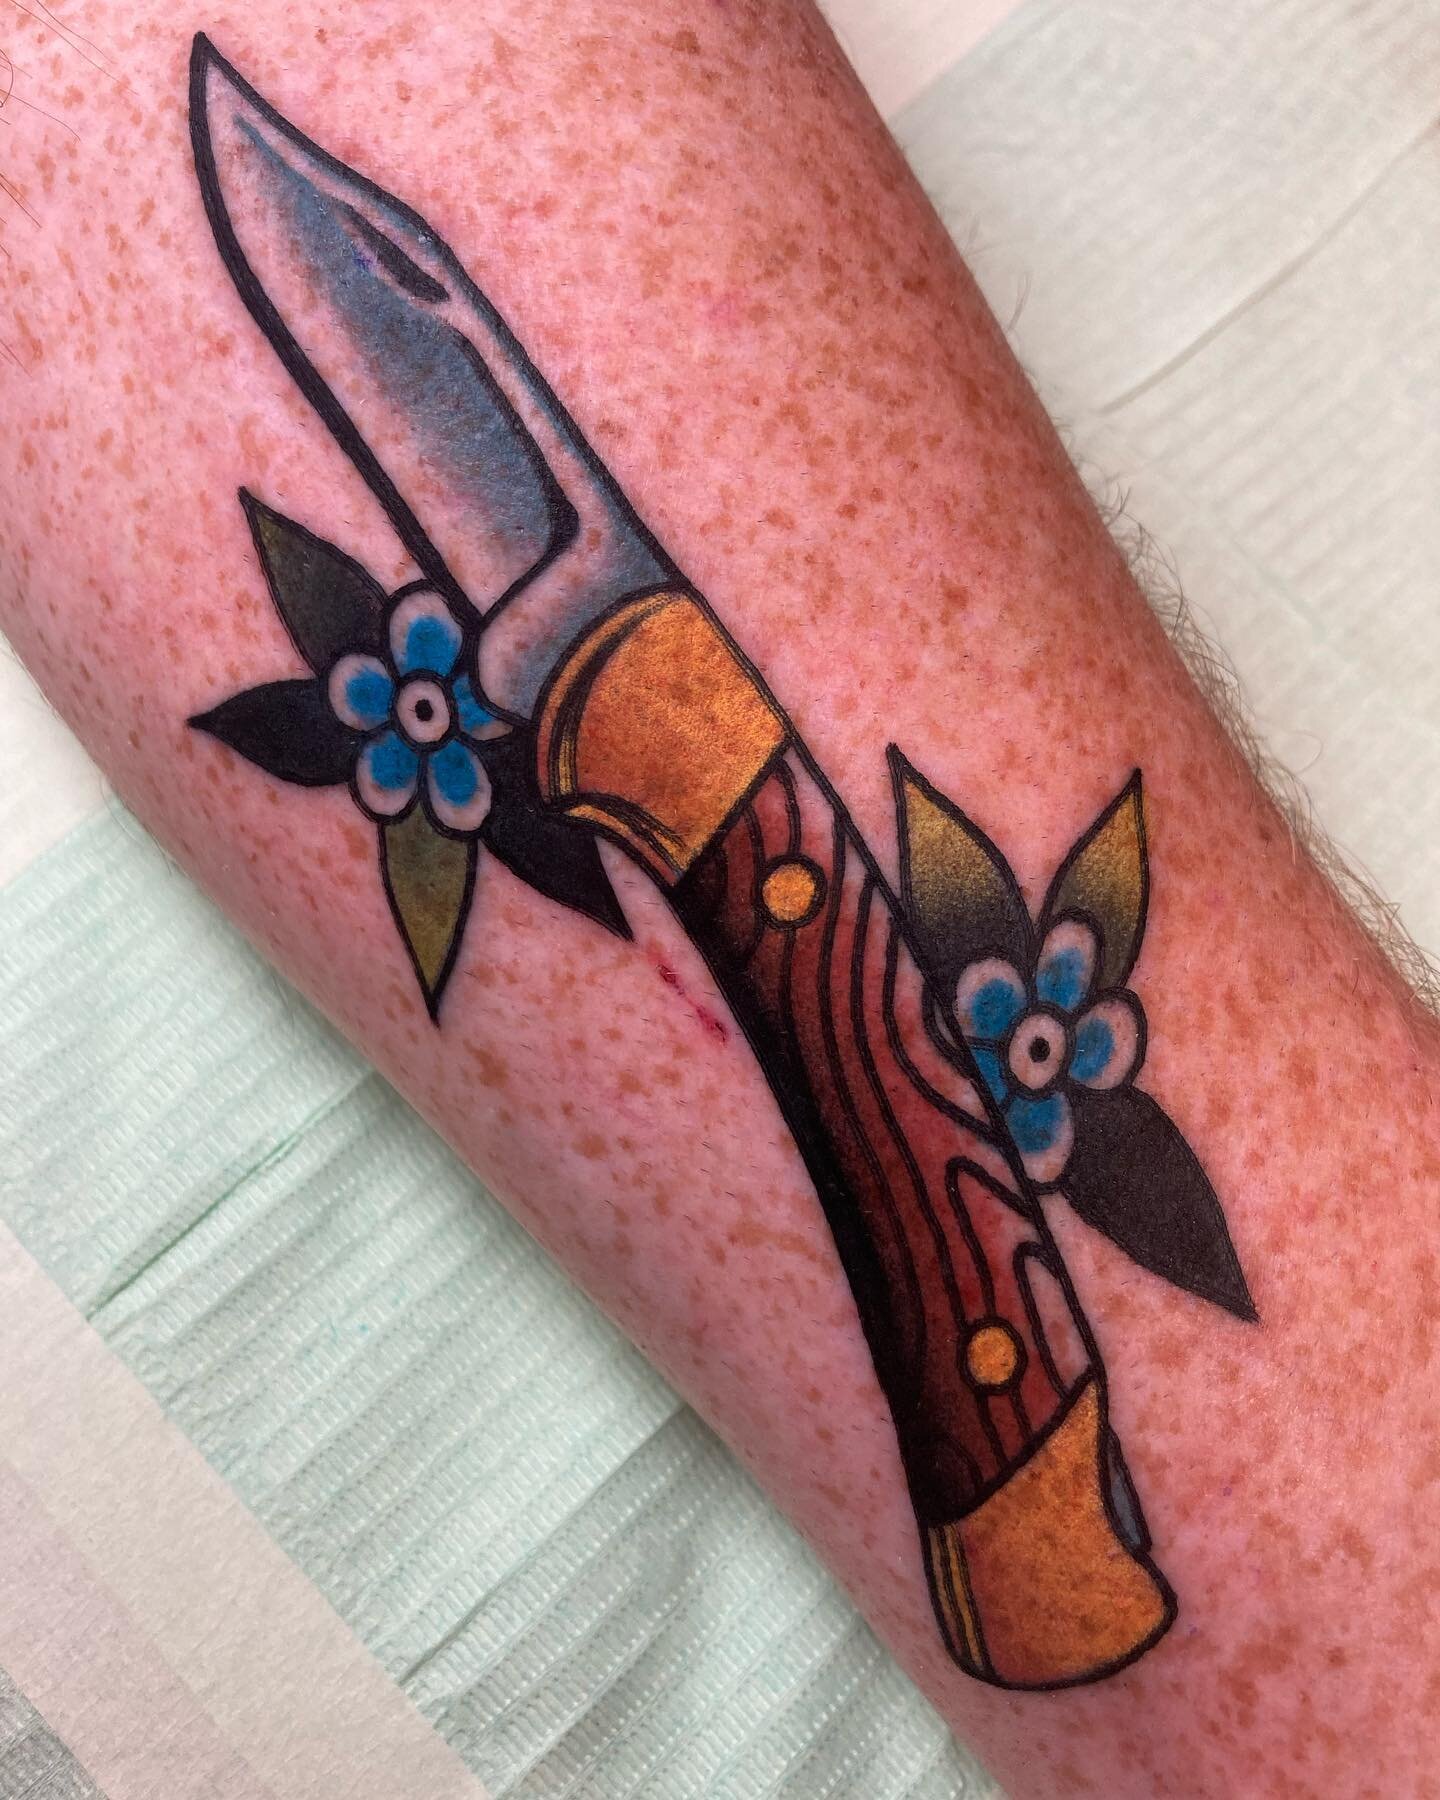 Worlds finest cutlery on @wjamescostello down @hotlinetattoo 

*****************
To book an appt, fill out the form on my waitlist! Link in the bio